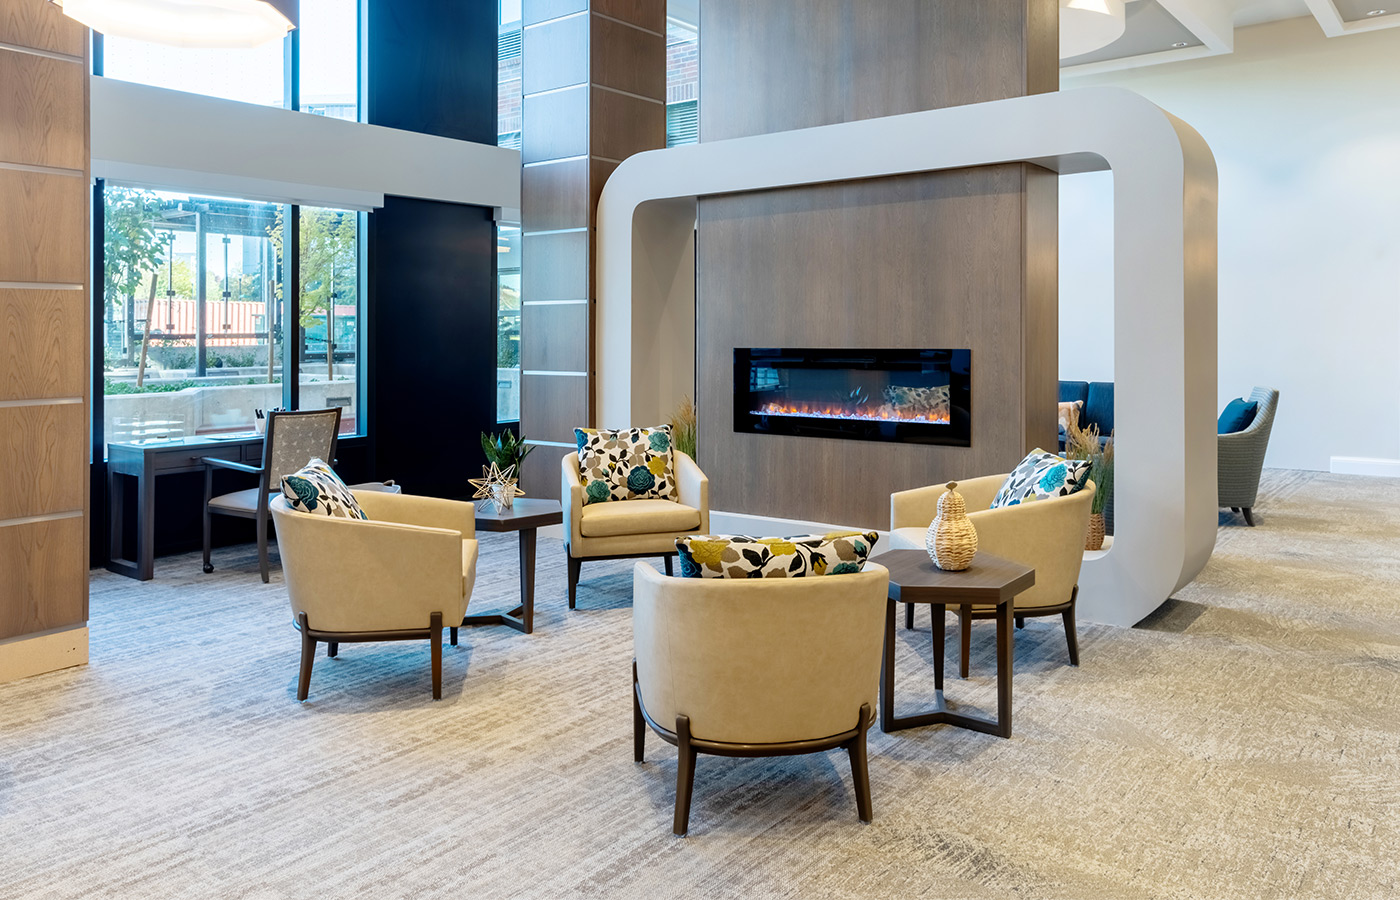 The memory care lounge area with seating and a fireplace.